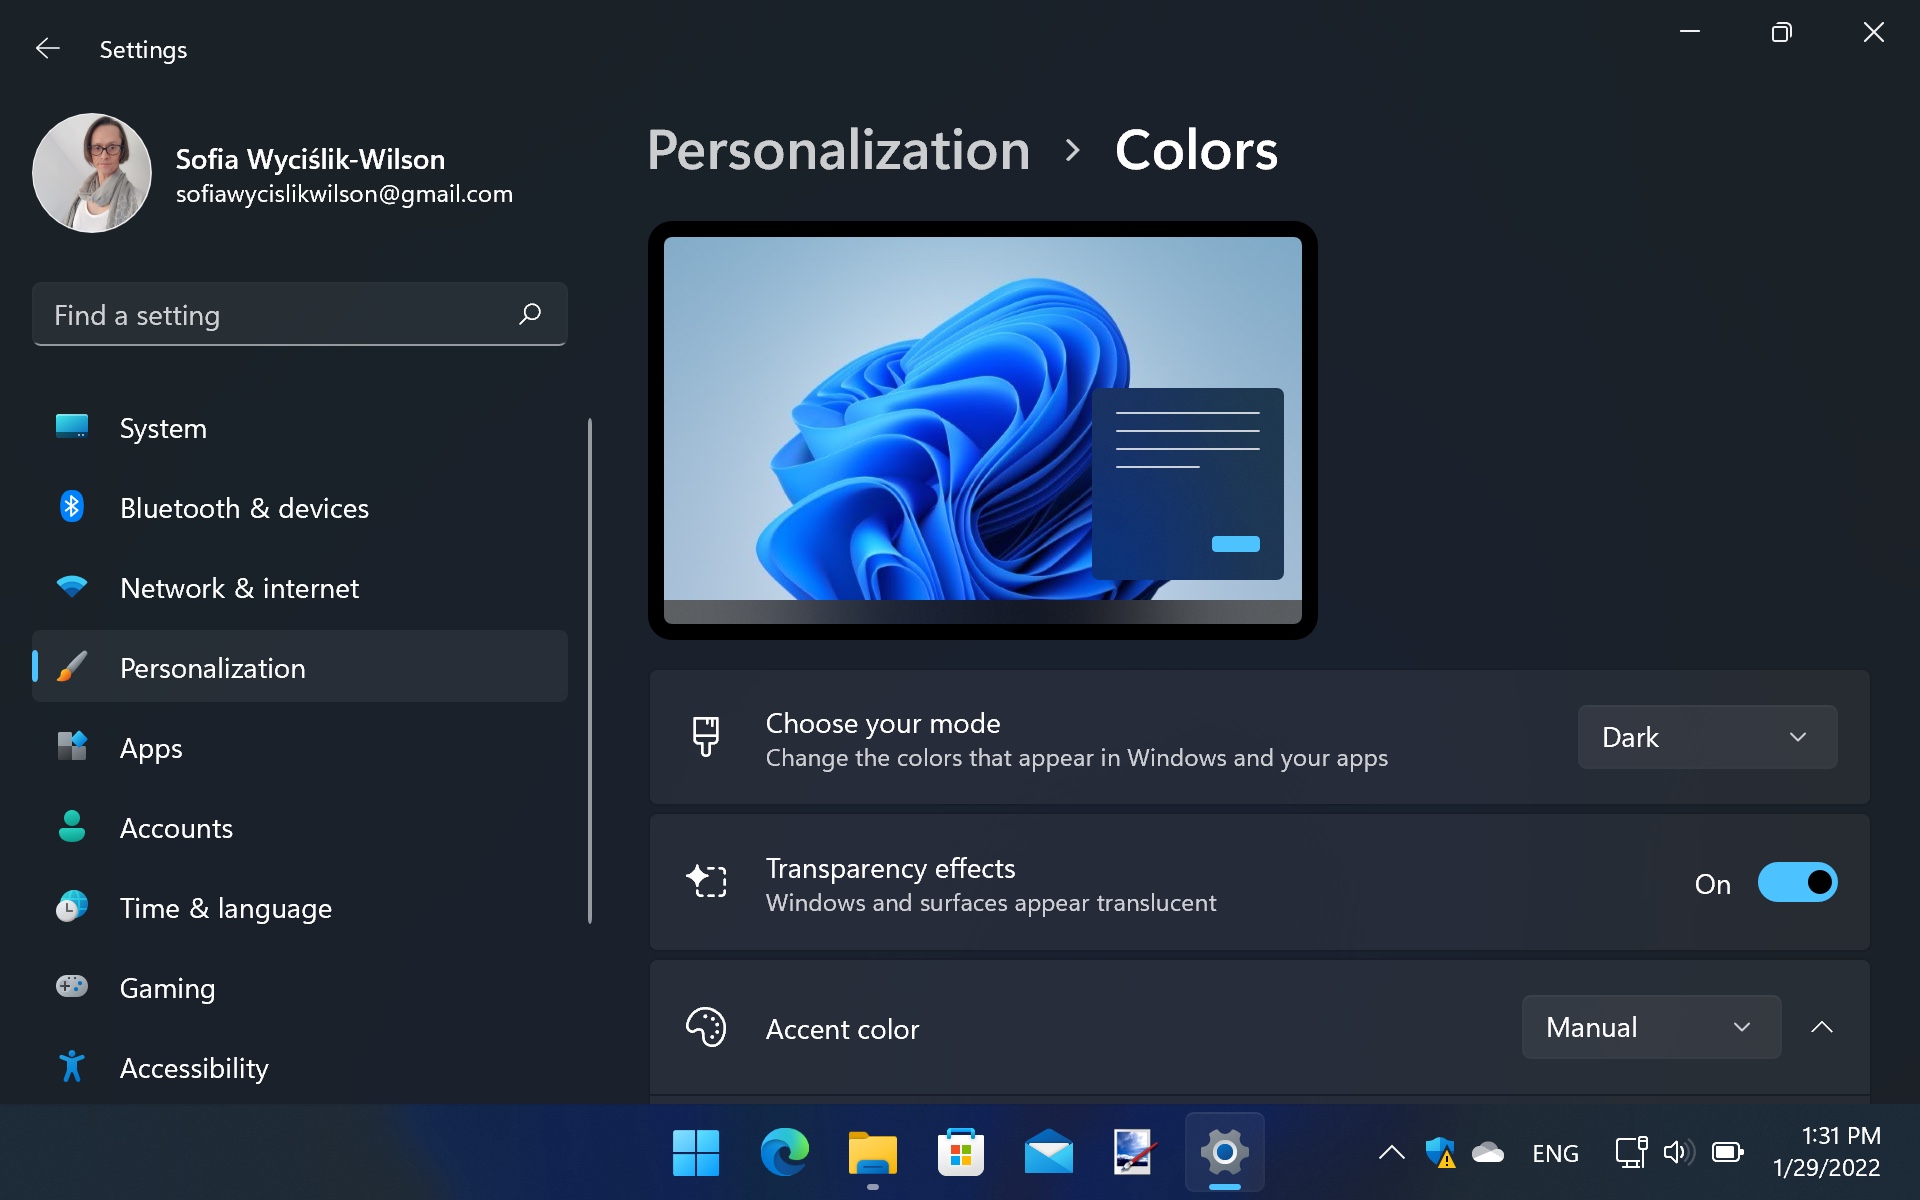 20 tips and tricks for Windows 11 screenshot